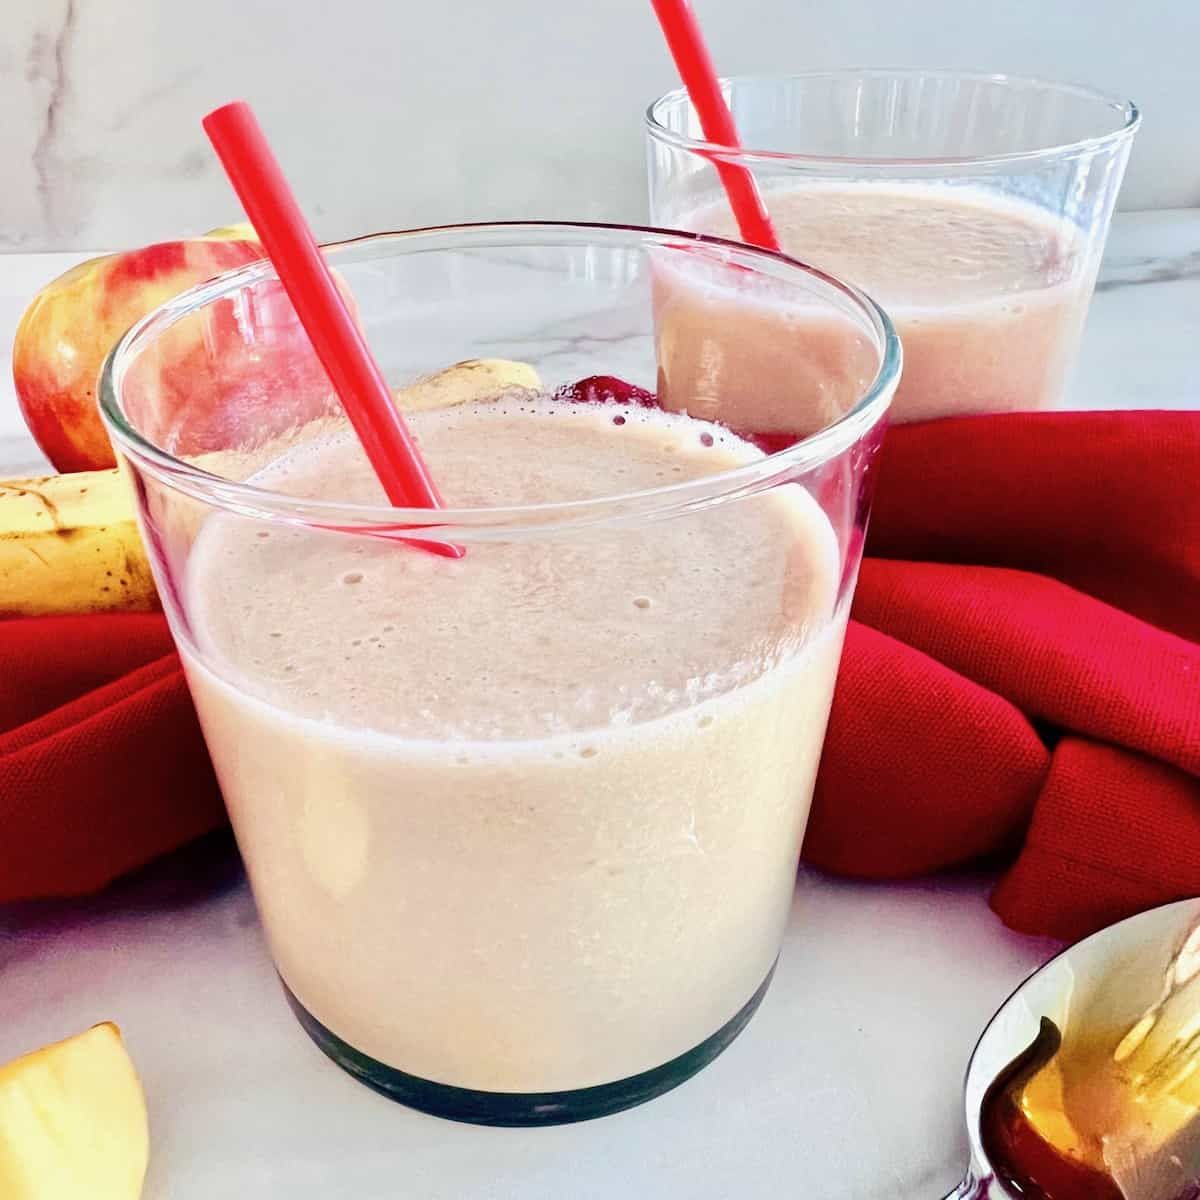 Apple Banana Smoothie - The Short Order Cook